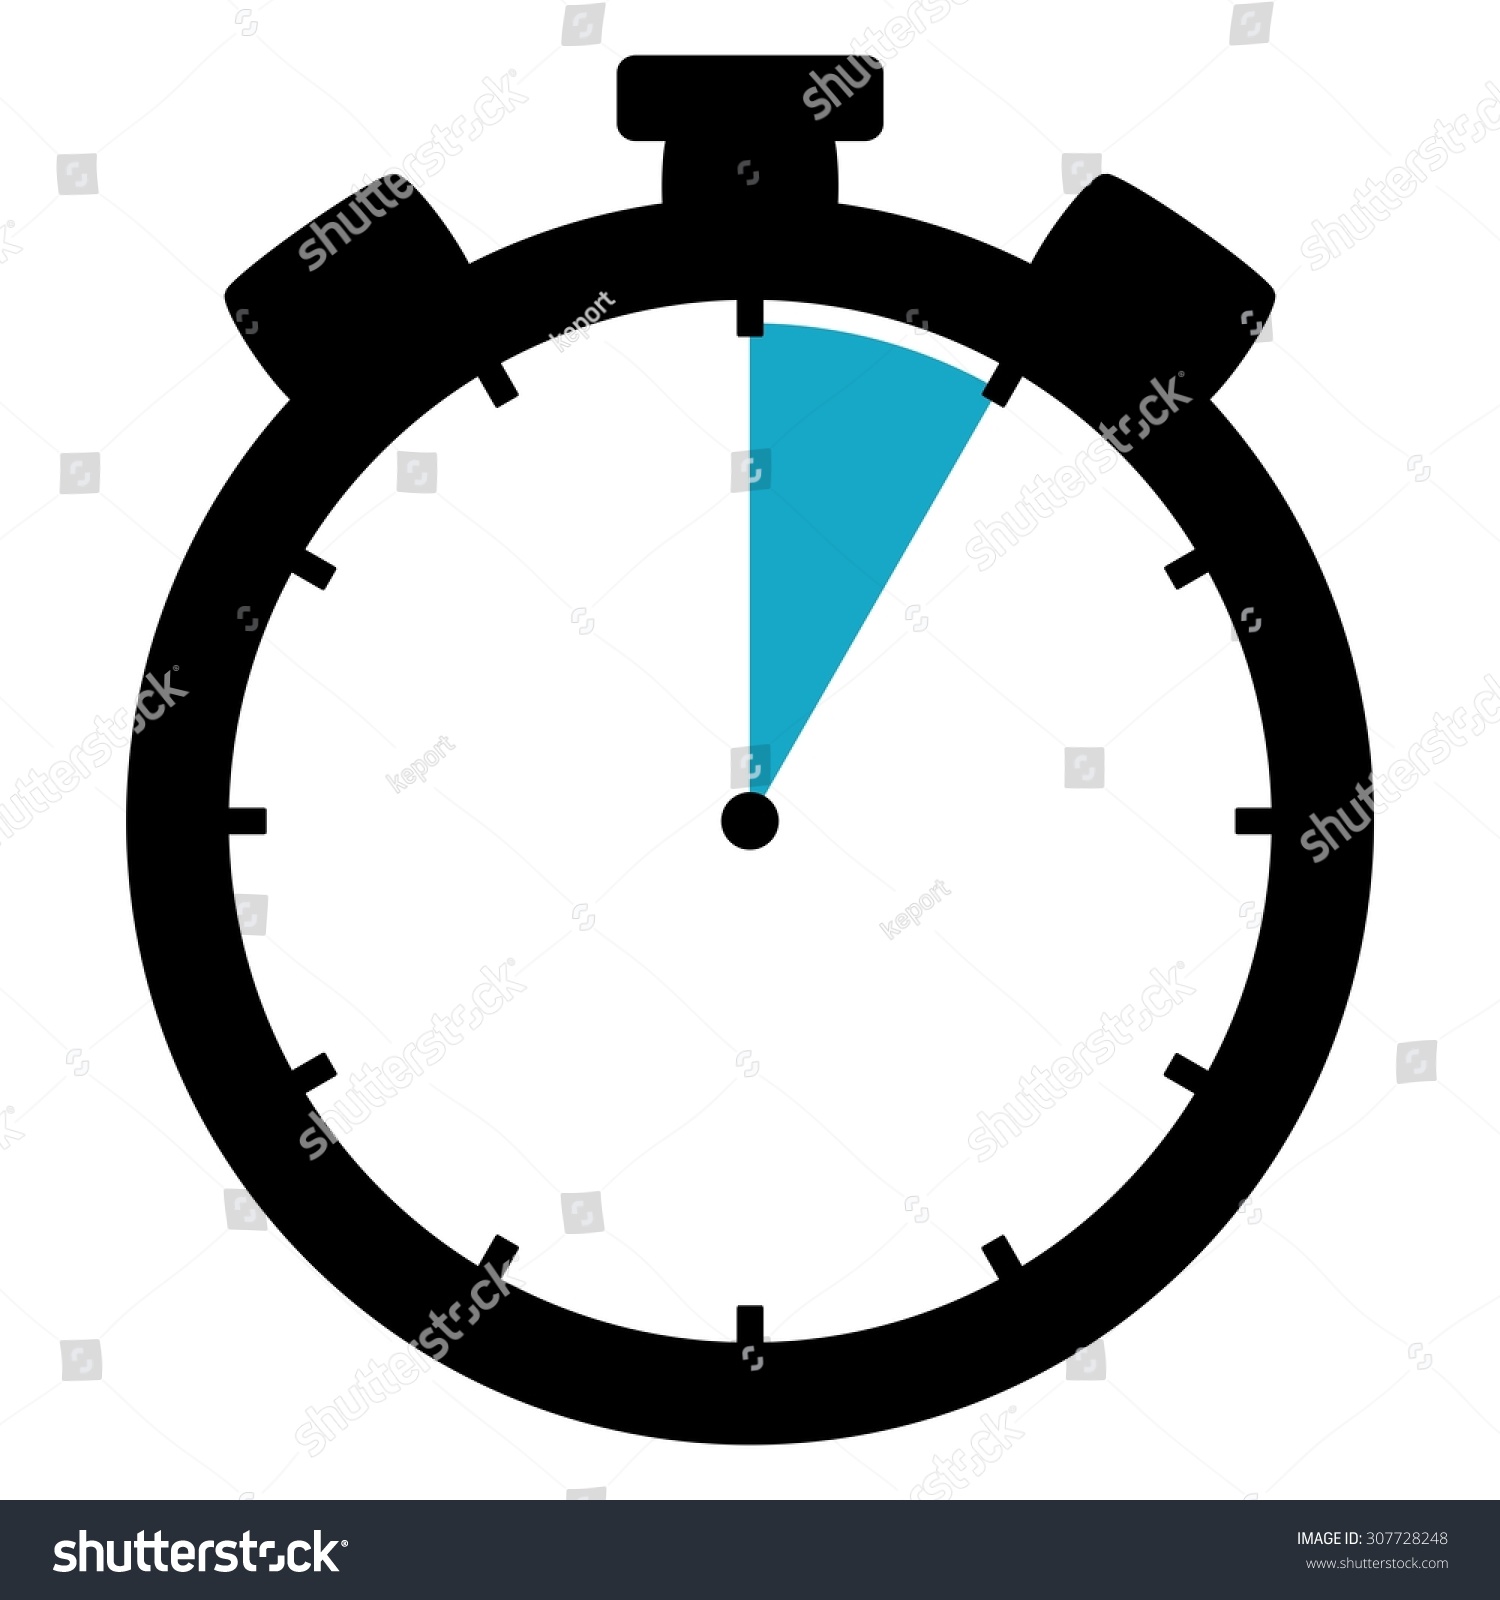 Black And Blue Stopwatch Icon Showing Seconds 5 Minutes Or 1 Hour Stock Photo ...1500 x 1600